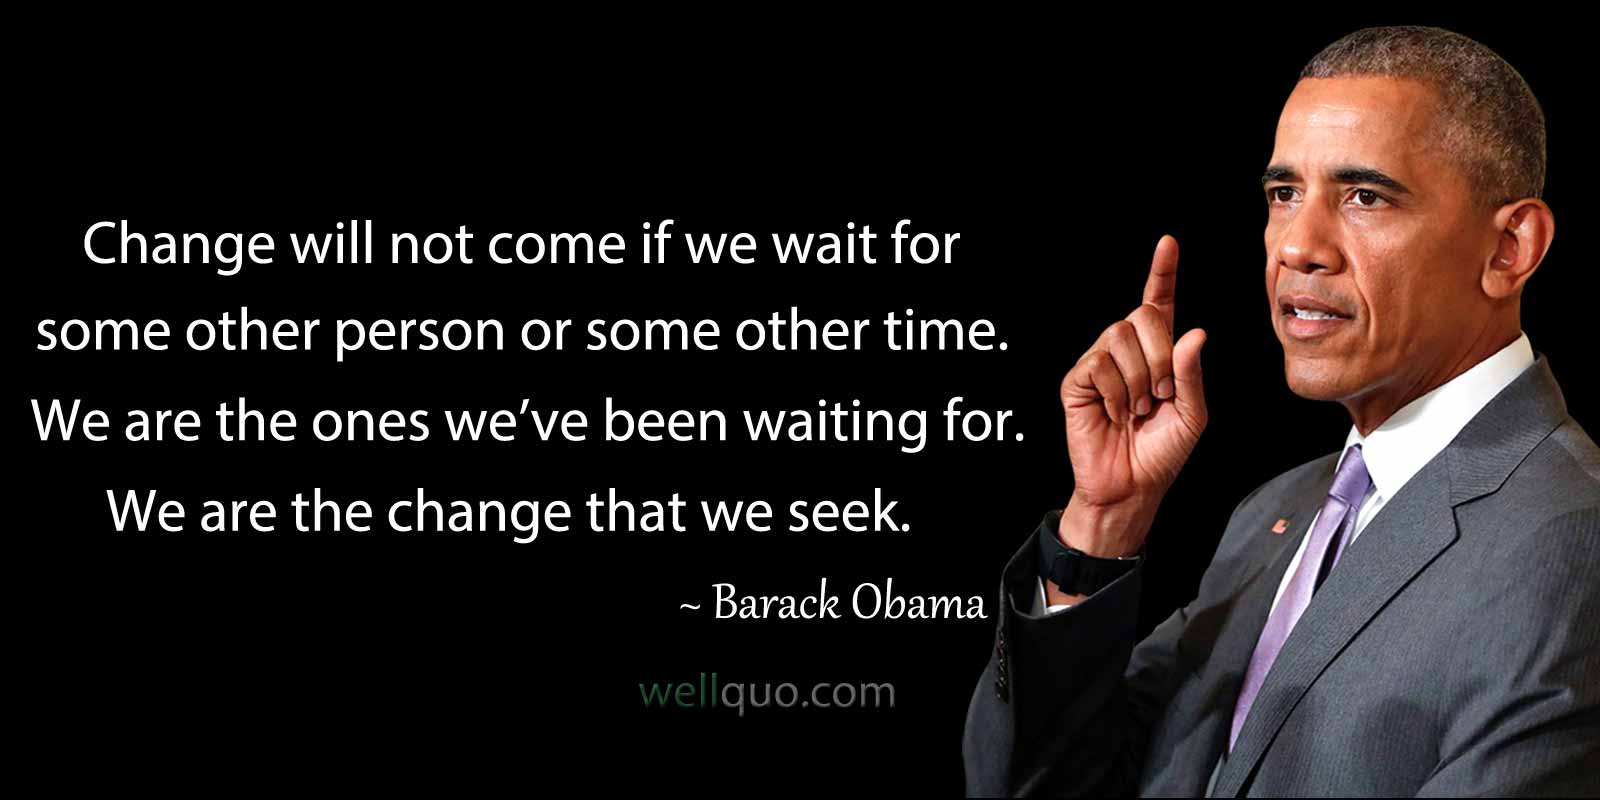 Barack Obama Quotes on change - Change will not come if we wait for some other person or some other time. We are the ones we've been waiting for. We are the change that we seek.